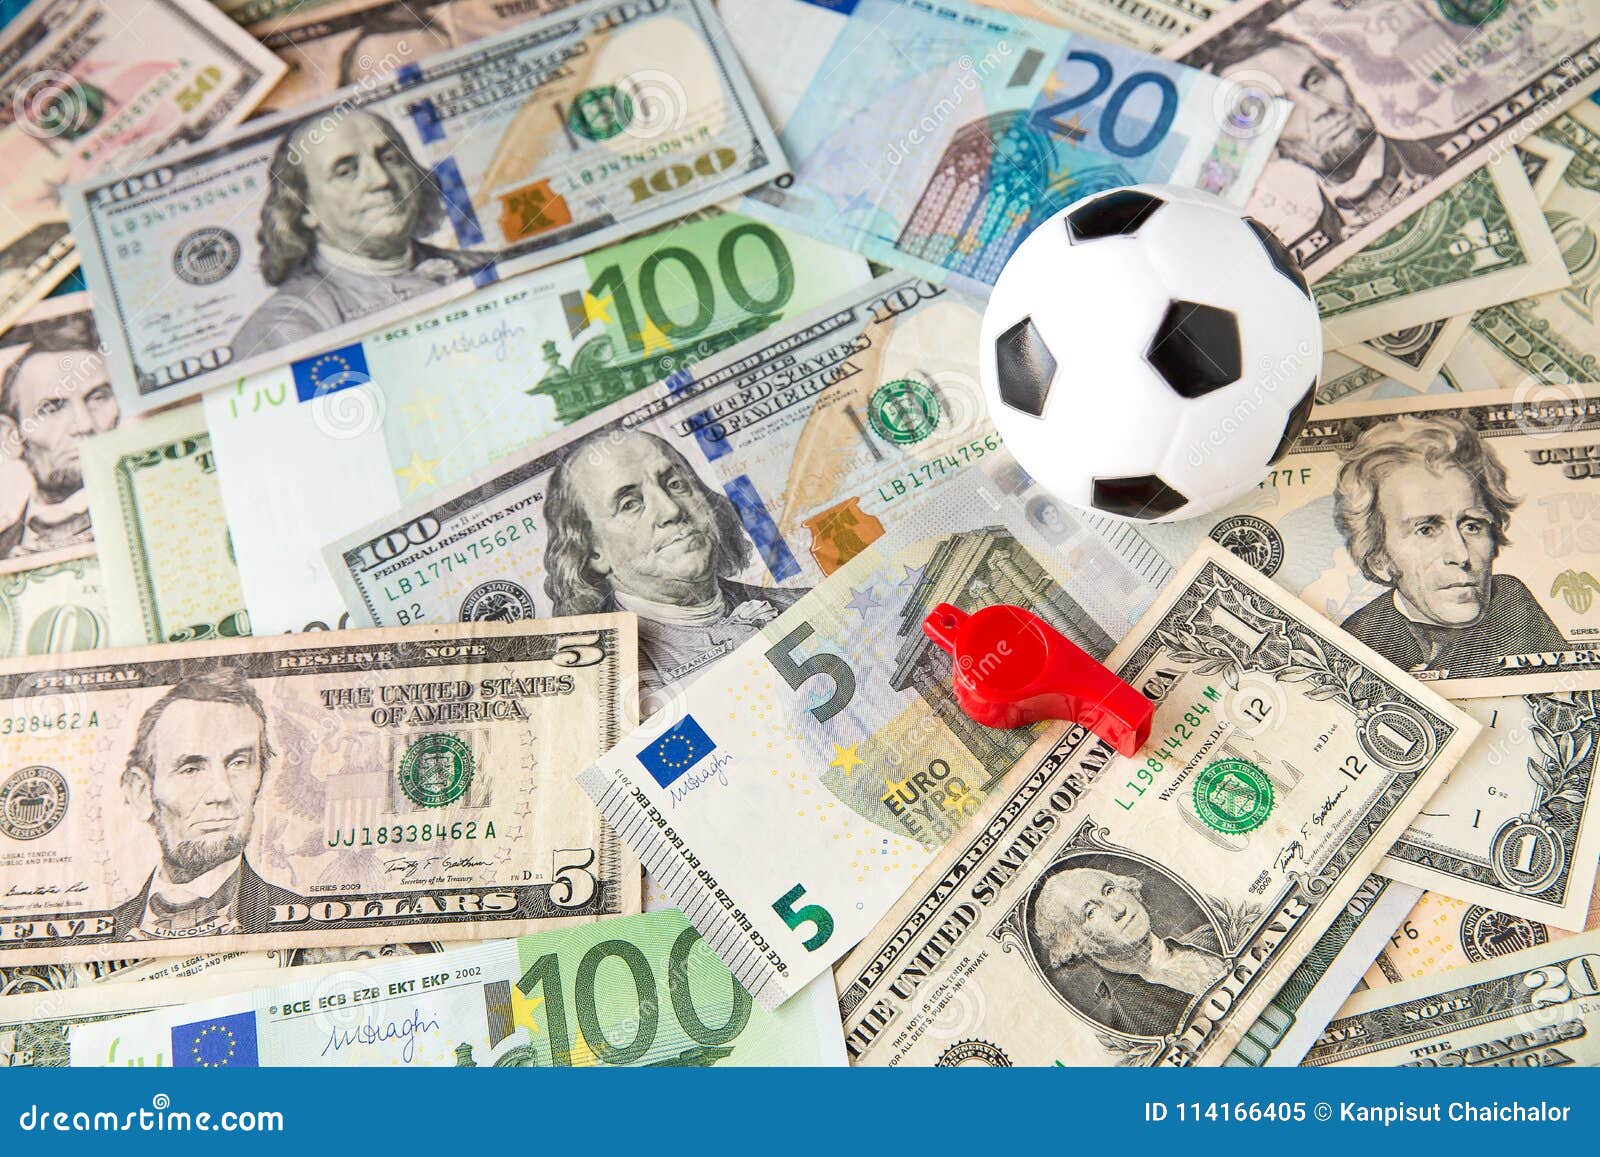 soccer ball over a lot of money. corruption football game. betting and gambling concept.